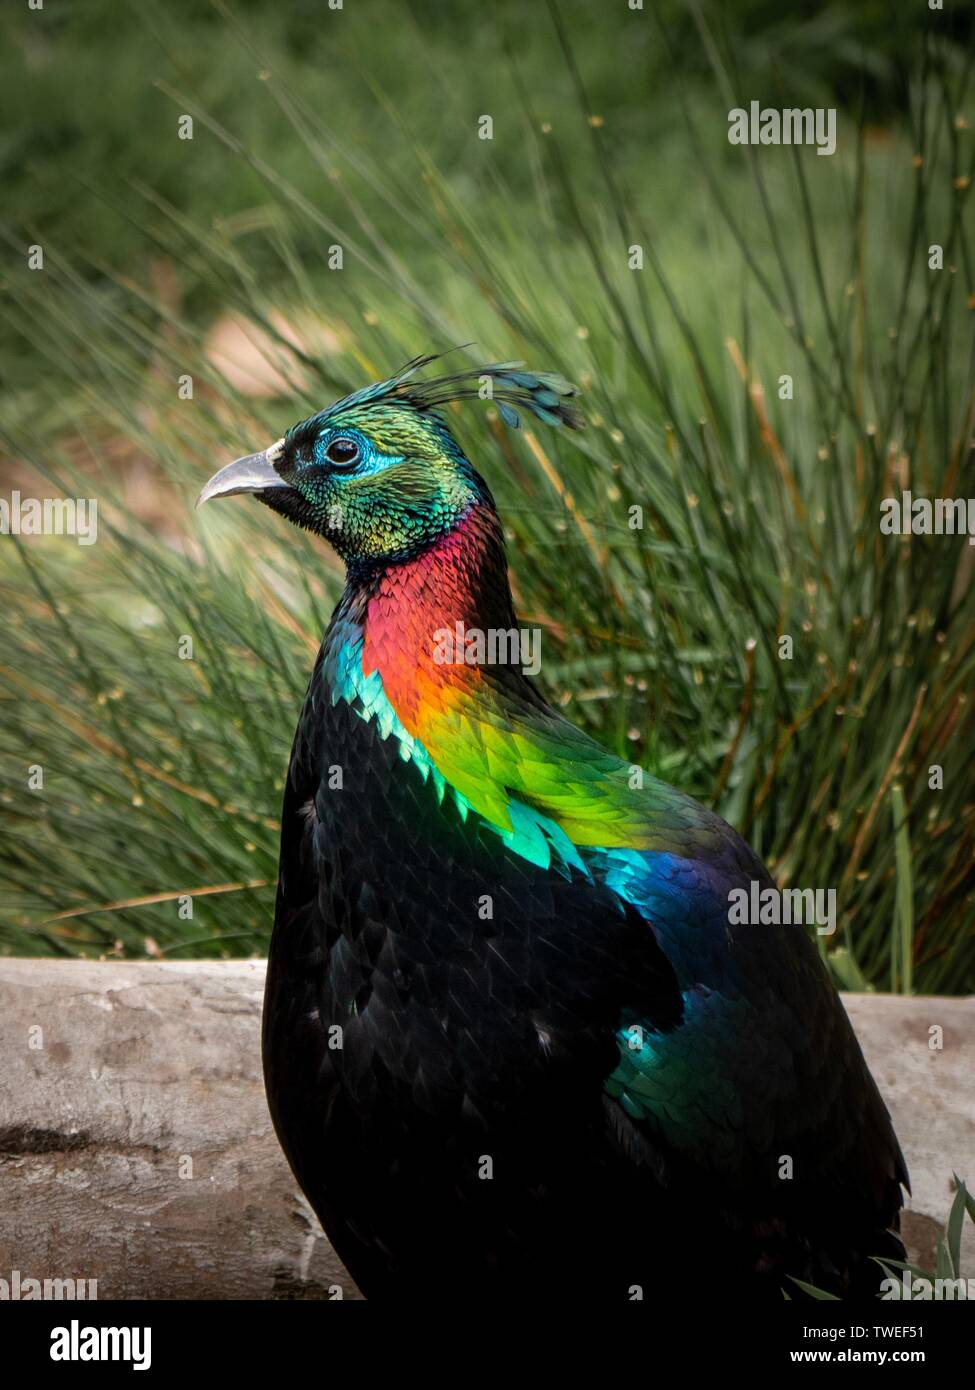 A majestic Himalayan Monal Pheasant showing off his iridescent neck plumage Stock Photo